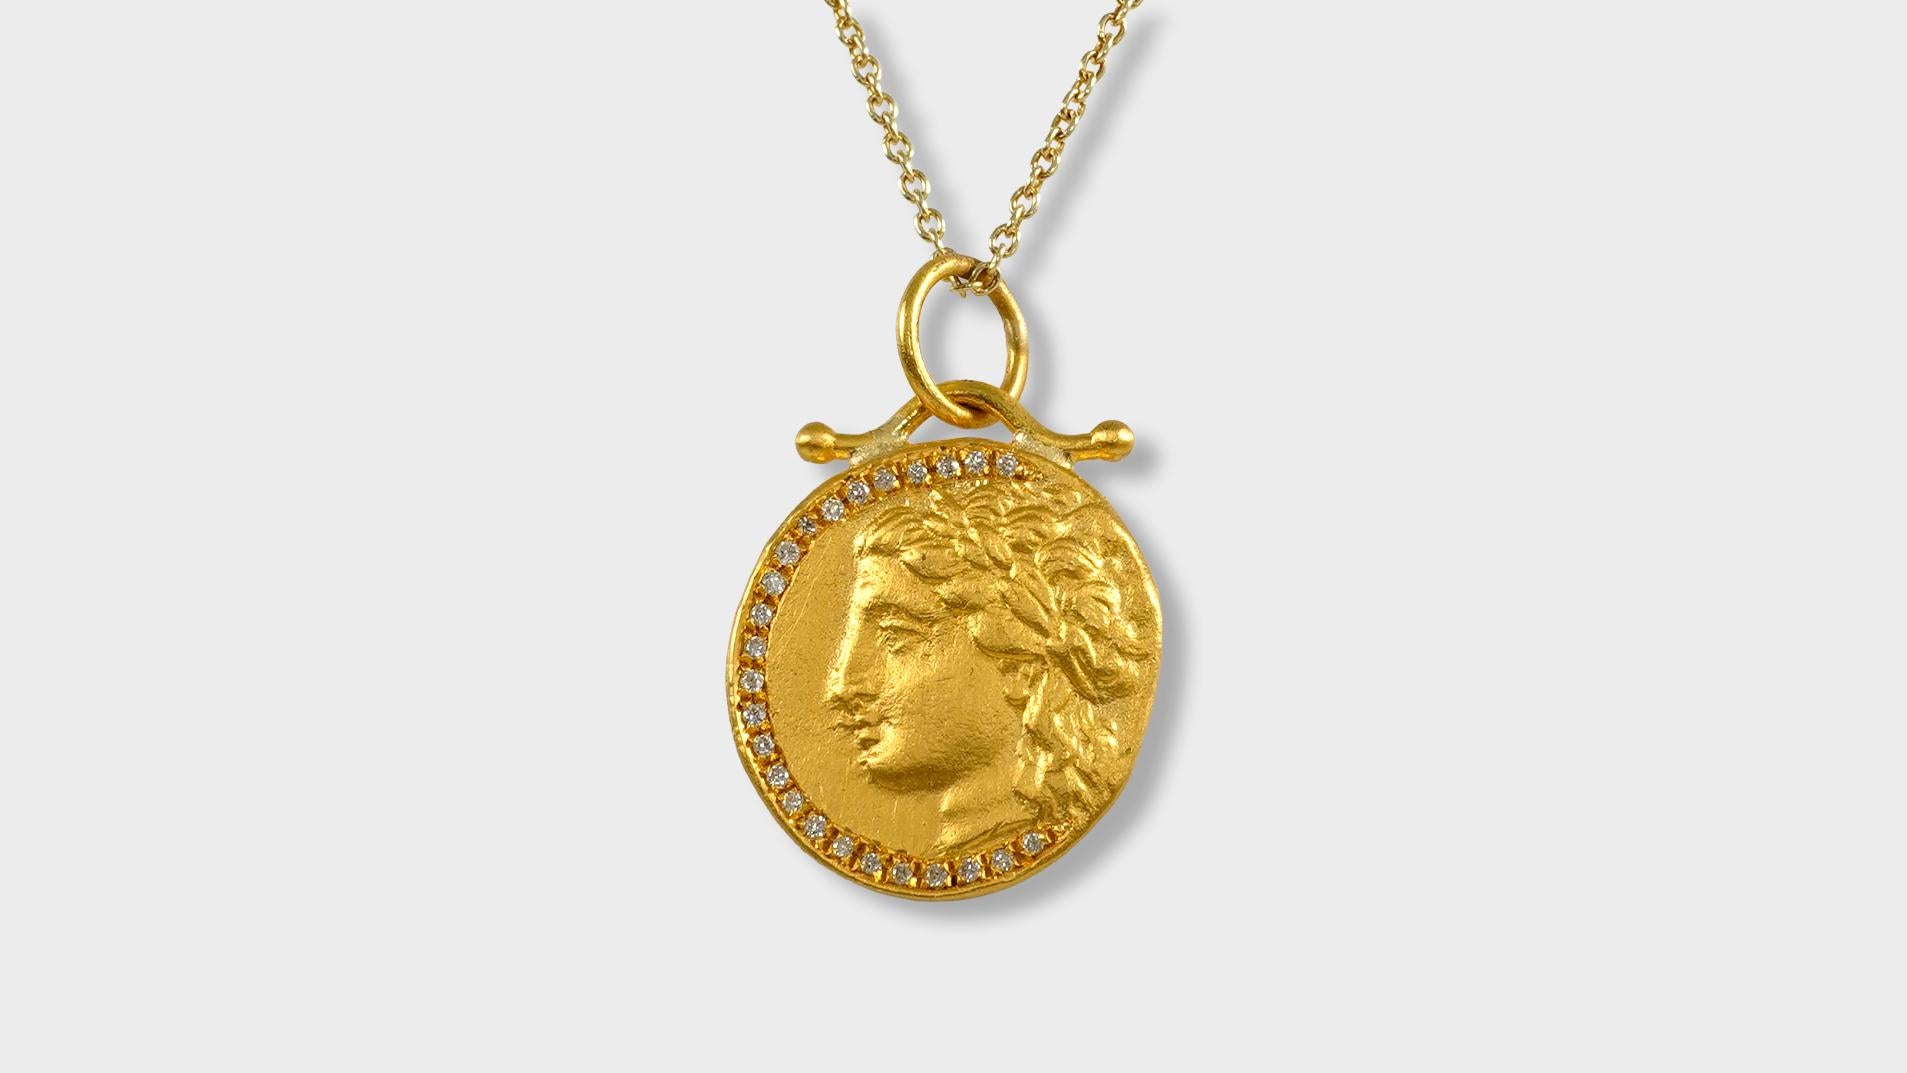 Ancient Greek Goddess, Coin (Replica) Tetradrachm Charm Pendant, 24kt Solid Yellow Gold & 0.09ct Diamonds

Coin of Greek Goddess is a replica of ancient coins in the Turkish Museum. 

DETAILS:

25 Diamonds - 0.09ct
24kt Yellow Gold - 6.10 grams
Size